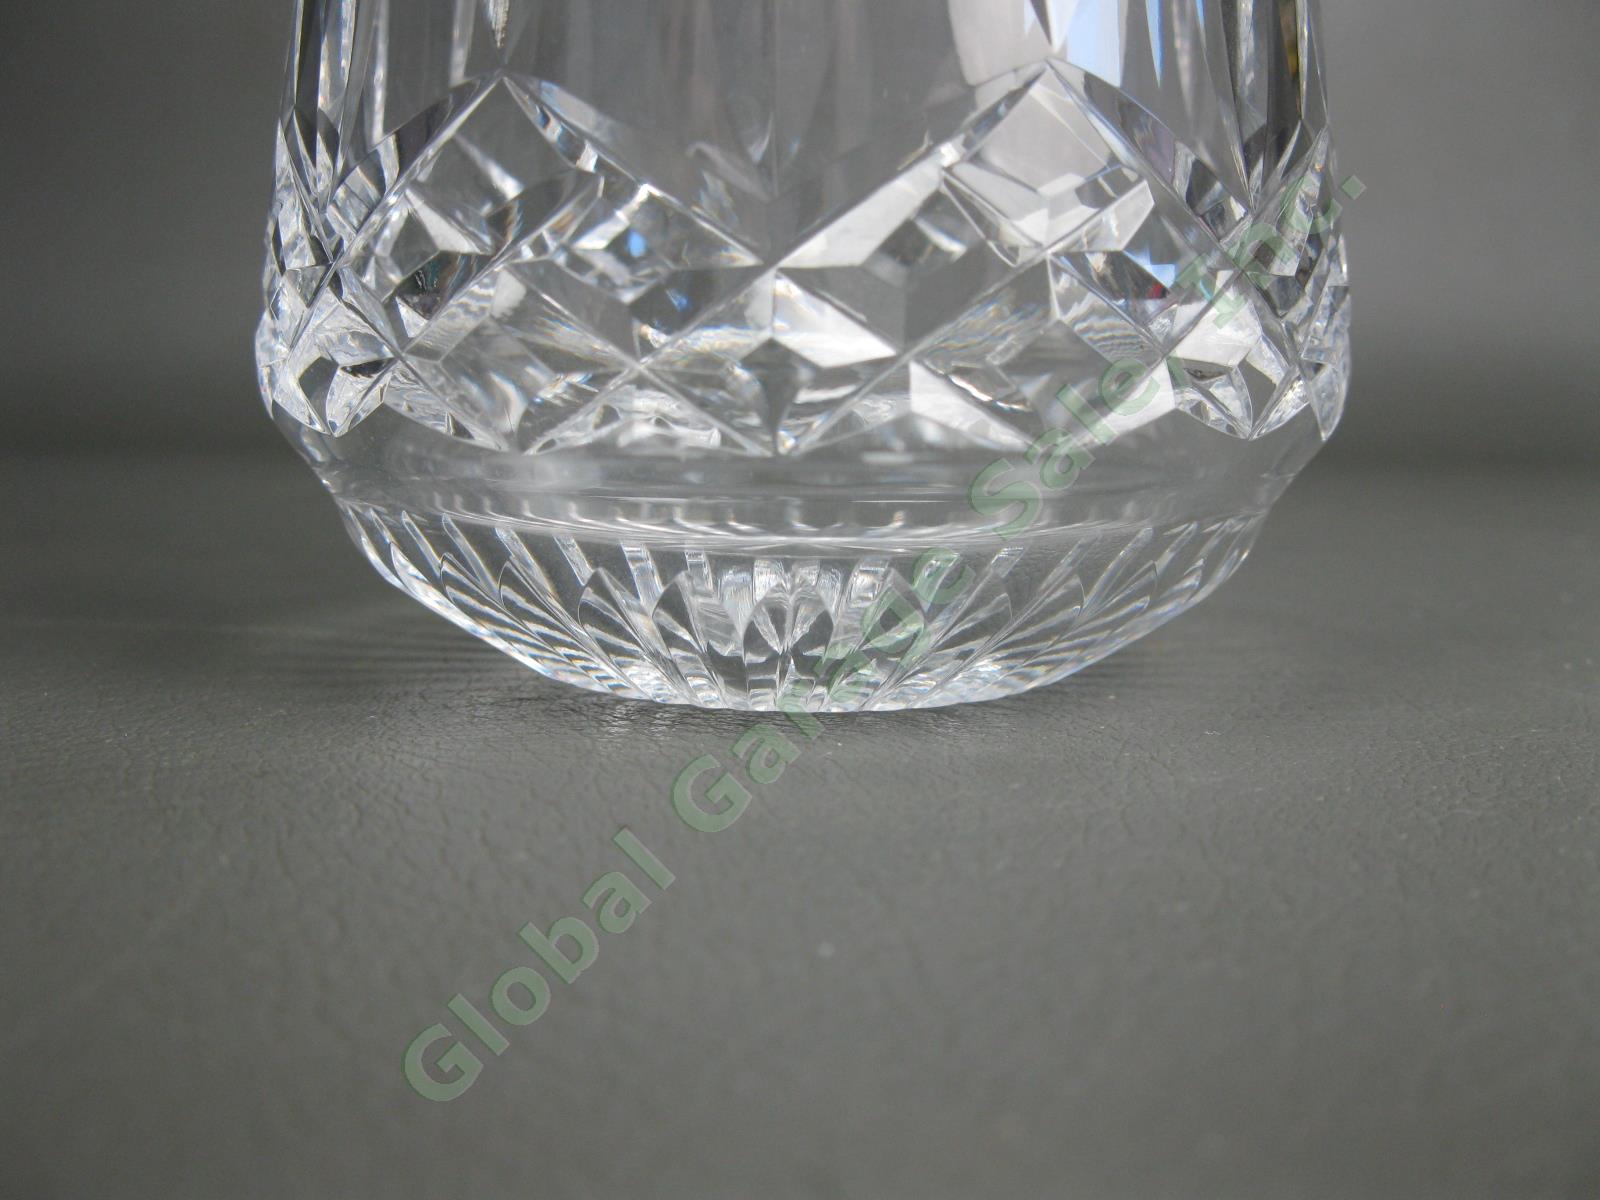 Original Waterford Crystal Lismore Roly Poly Old Fashioned Irish Whiskey Tumbler 3